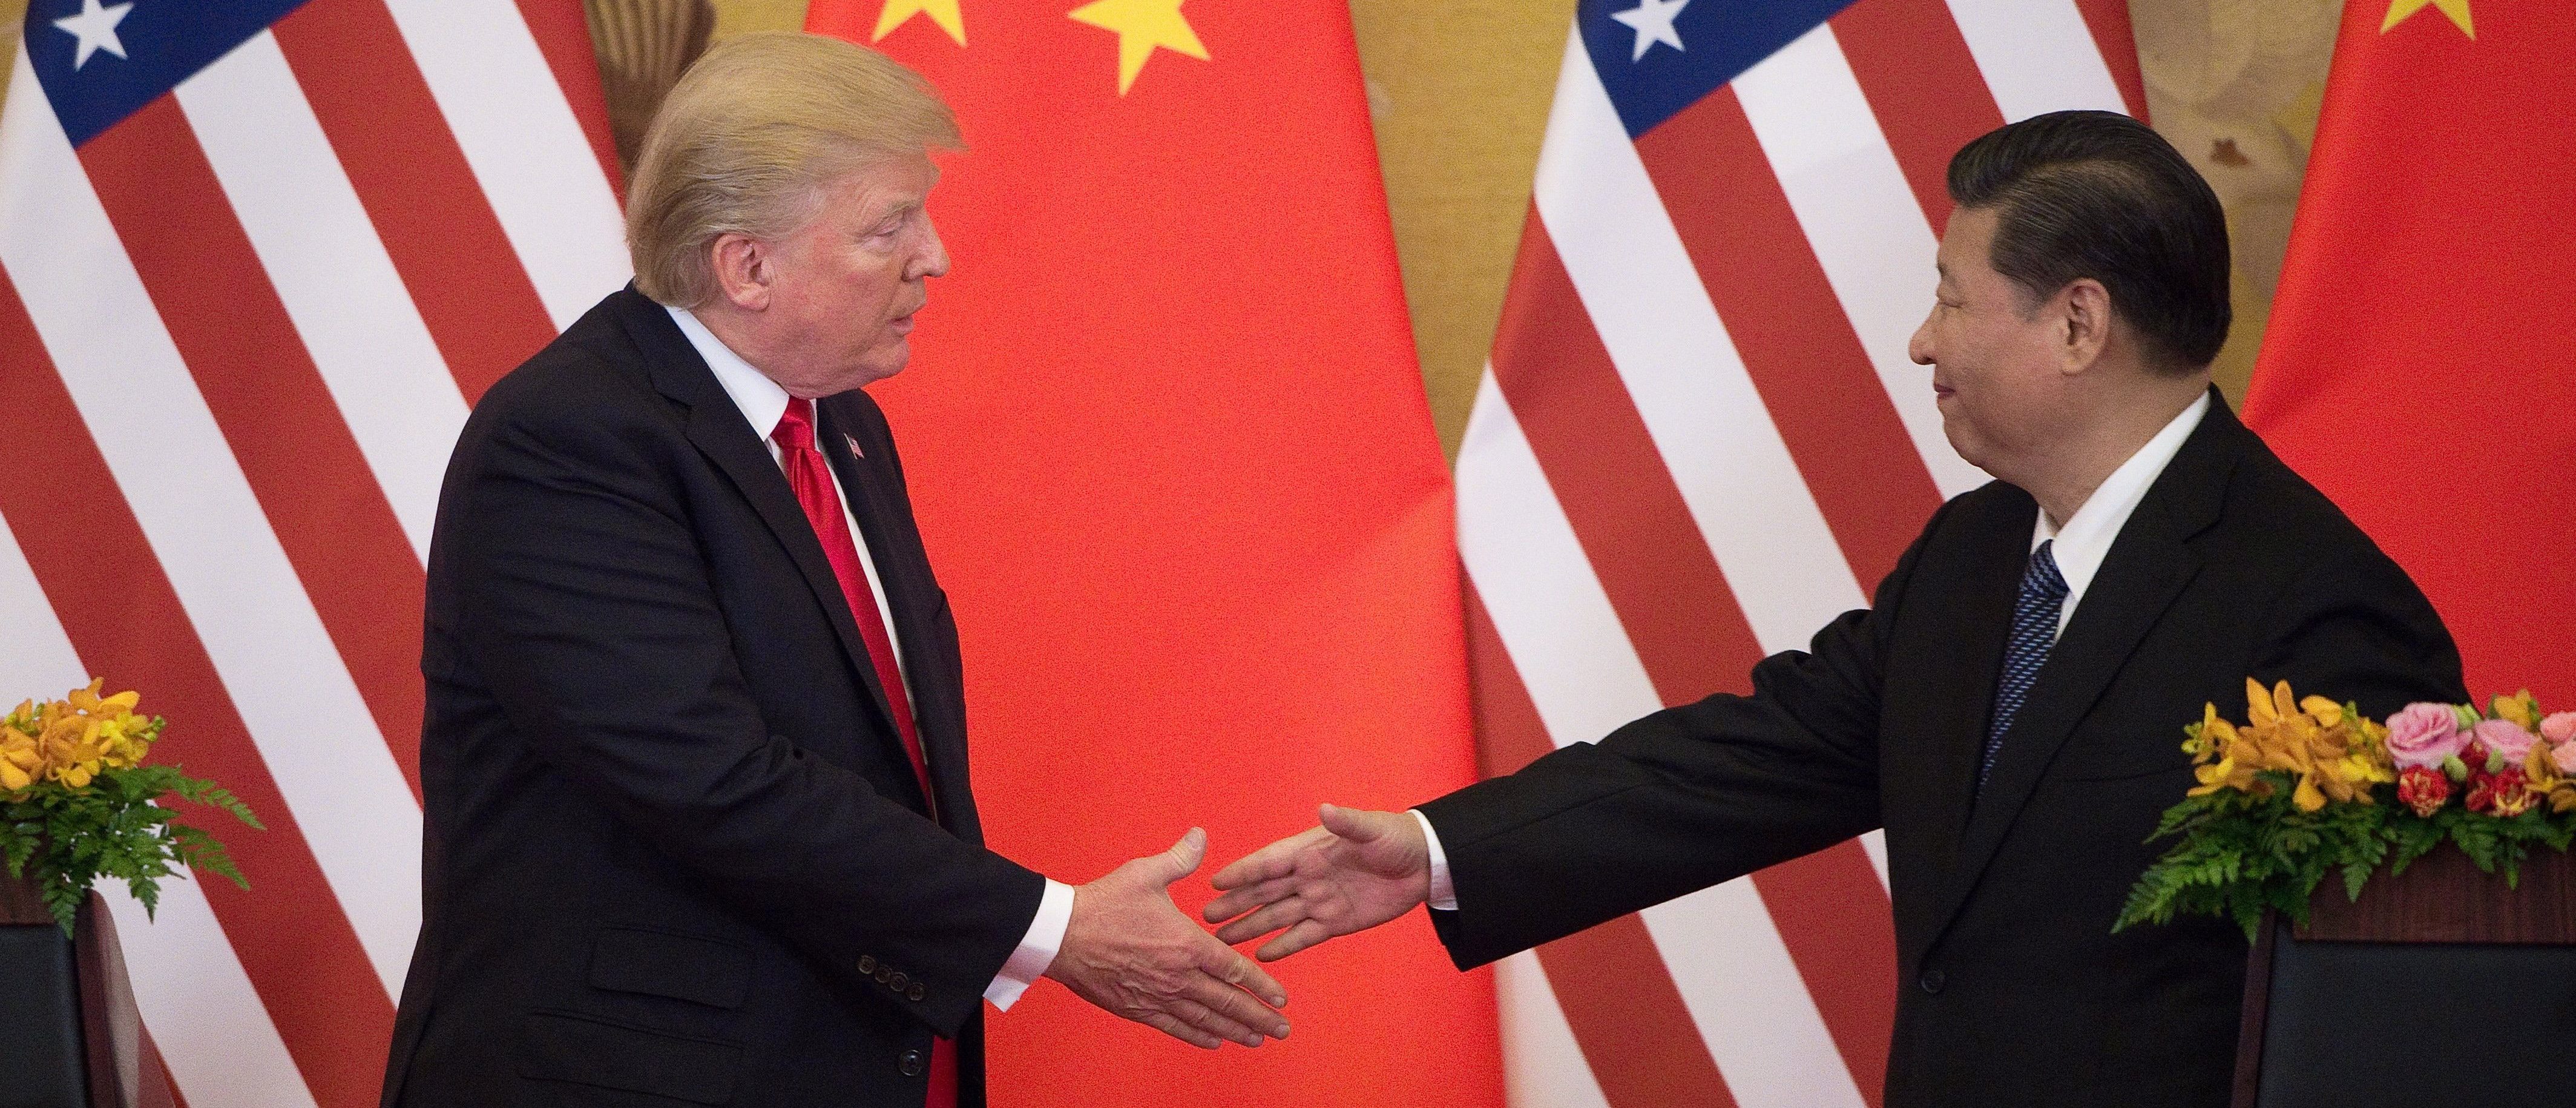 US President Donald Trump (L) shakes hands with China's President Xi Jinping at the end of a press conference at the Great Hall of the People in Beijing on November 9, 2017. Donald Trump urged Chinese leader Xi Jinping to work "hard" and act fast to help resolve the North Korean nuclear crisis, during their meeting in Beijing Thursday, warning that "time is quickly running out". / AFP PHOTO / Nicolas ASFOURI (Photo credit should read NICOLAS ASFOURI/AFP via Getty Images)